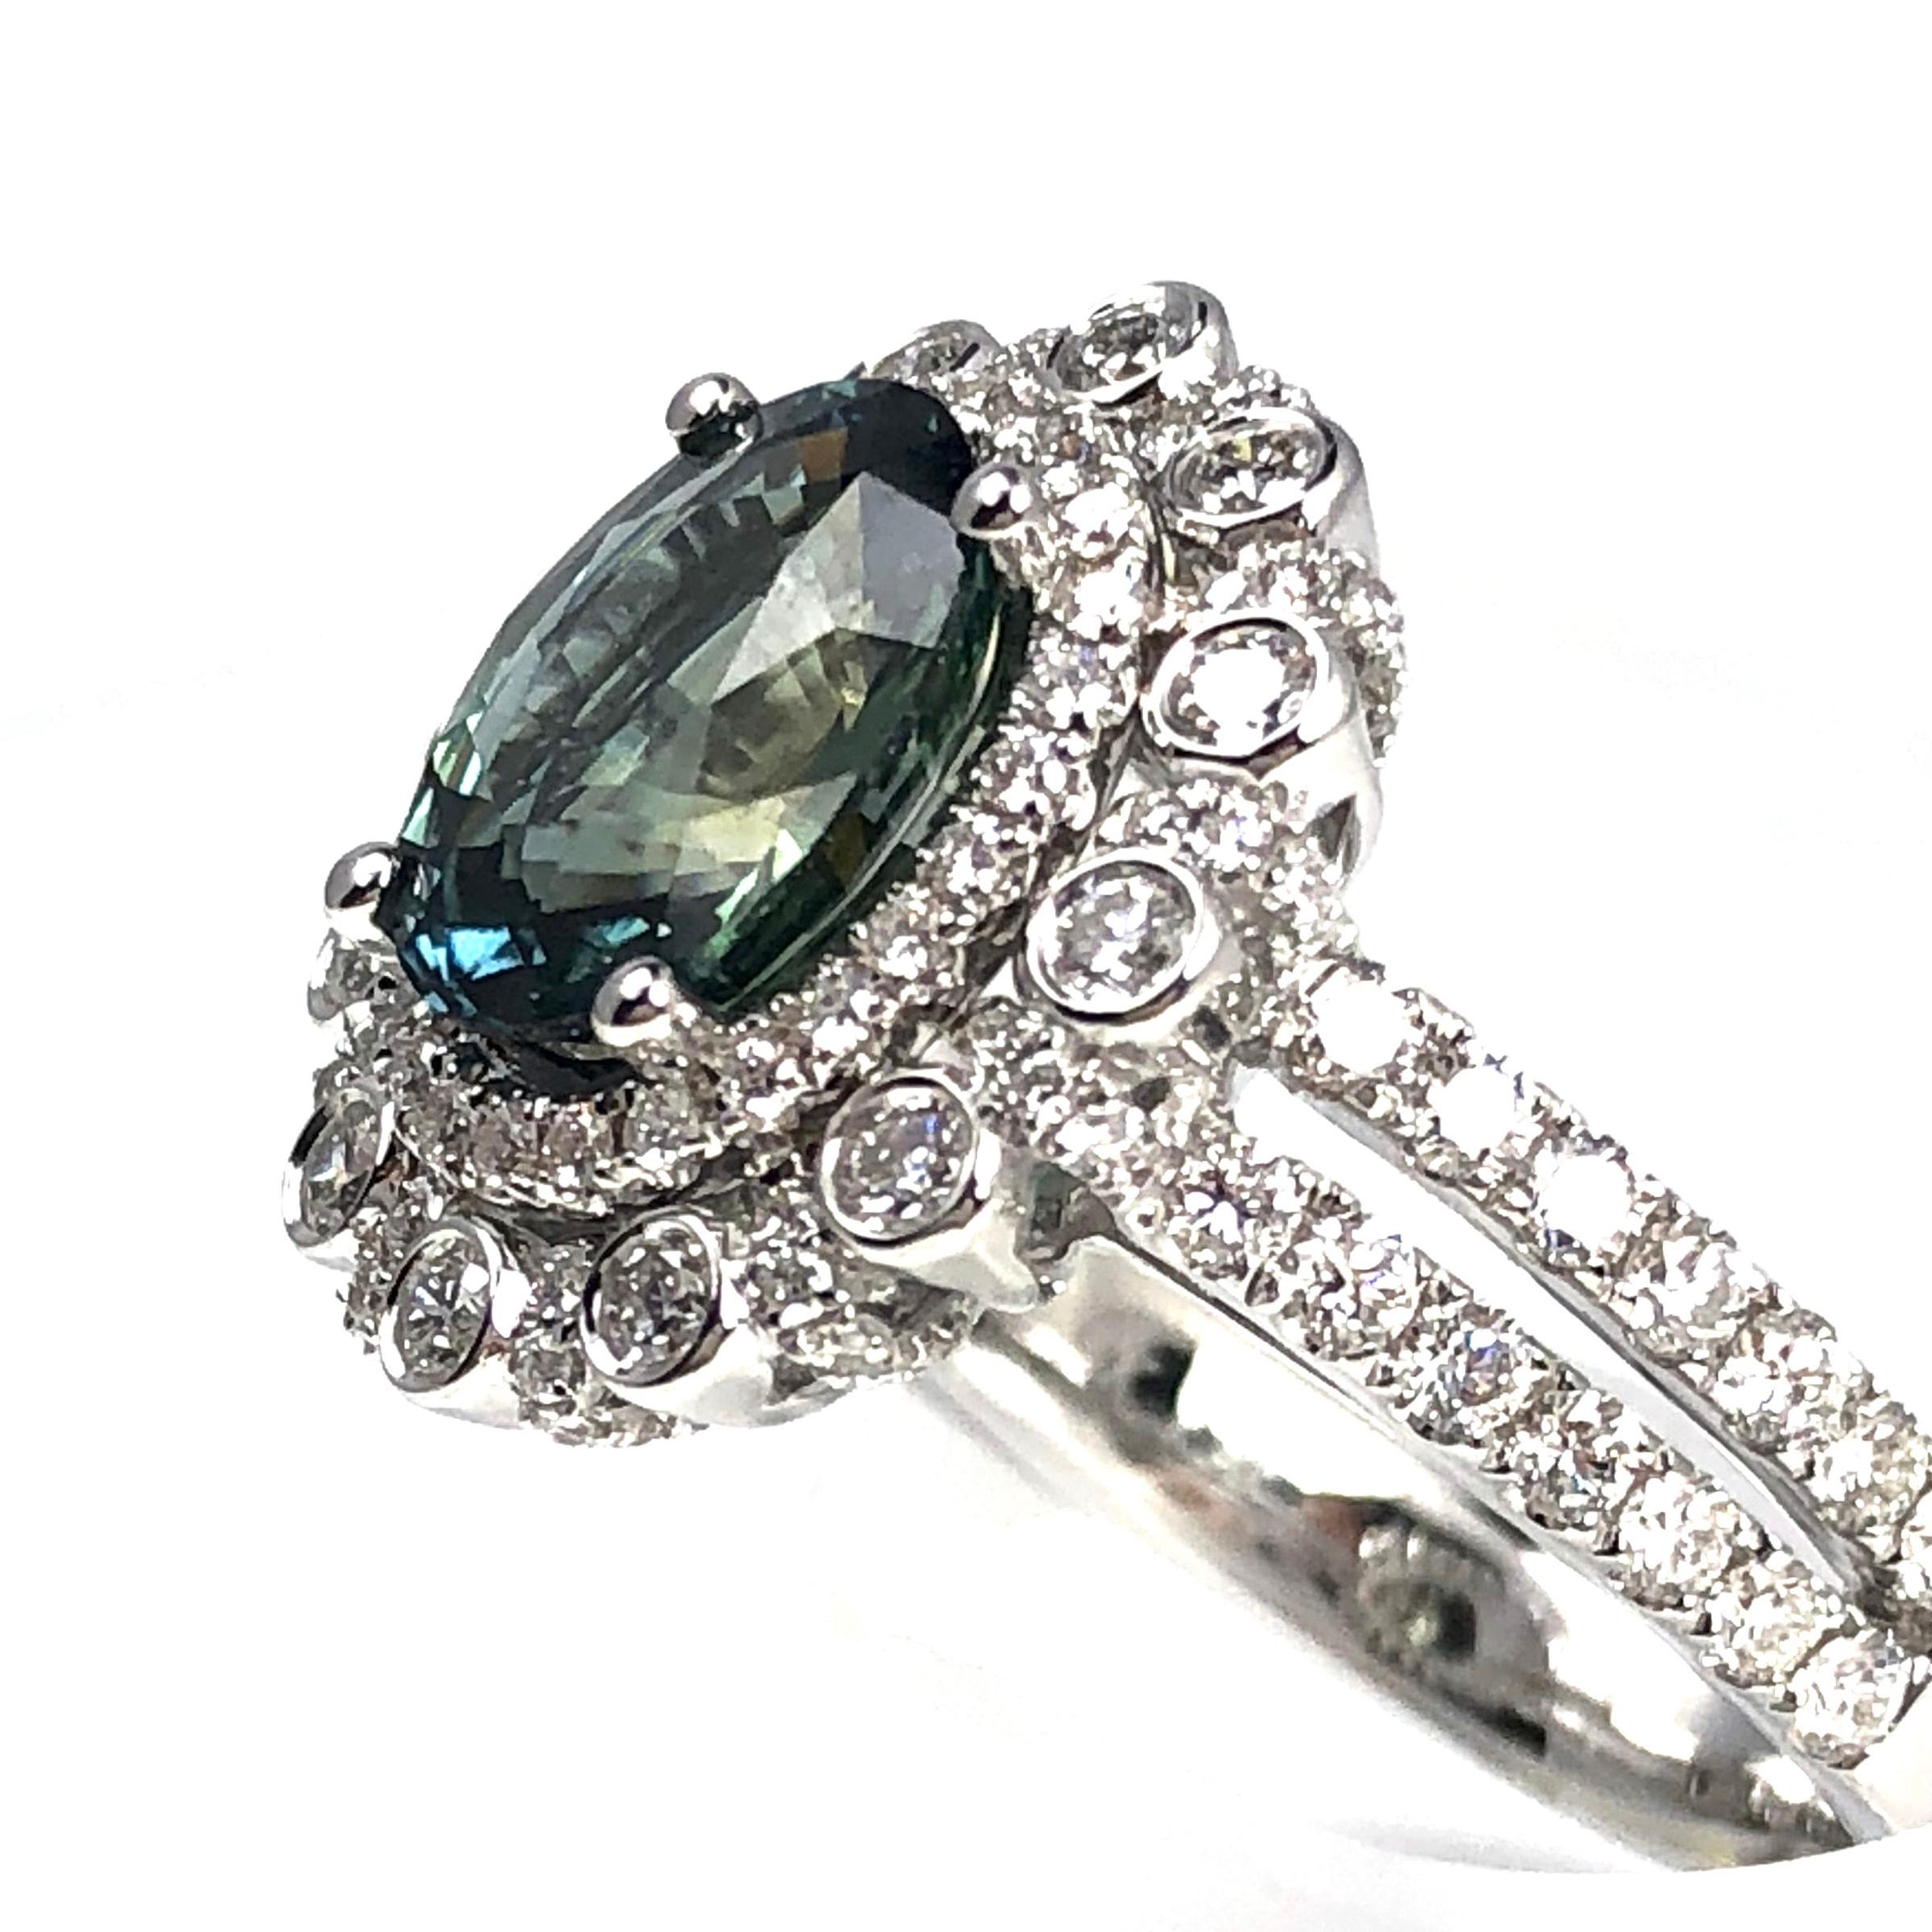 This ring features a 2.60 carat oval cut Green Sapphire center, surrounded by round white diamonds in a double halo. Additional diamonds trail down the split shank, bringing the total diamond weight to 1.03 carats.

Center: 2.60 carats Green